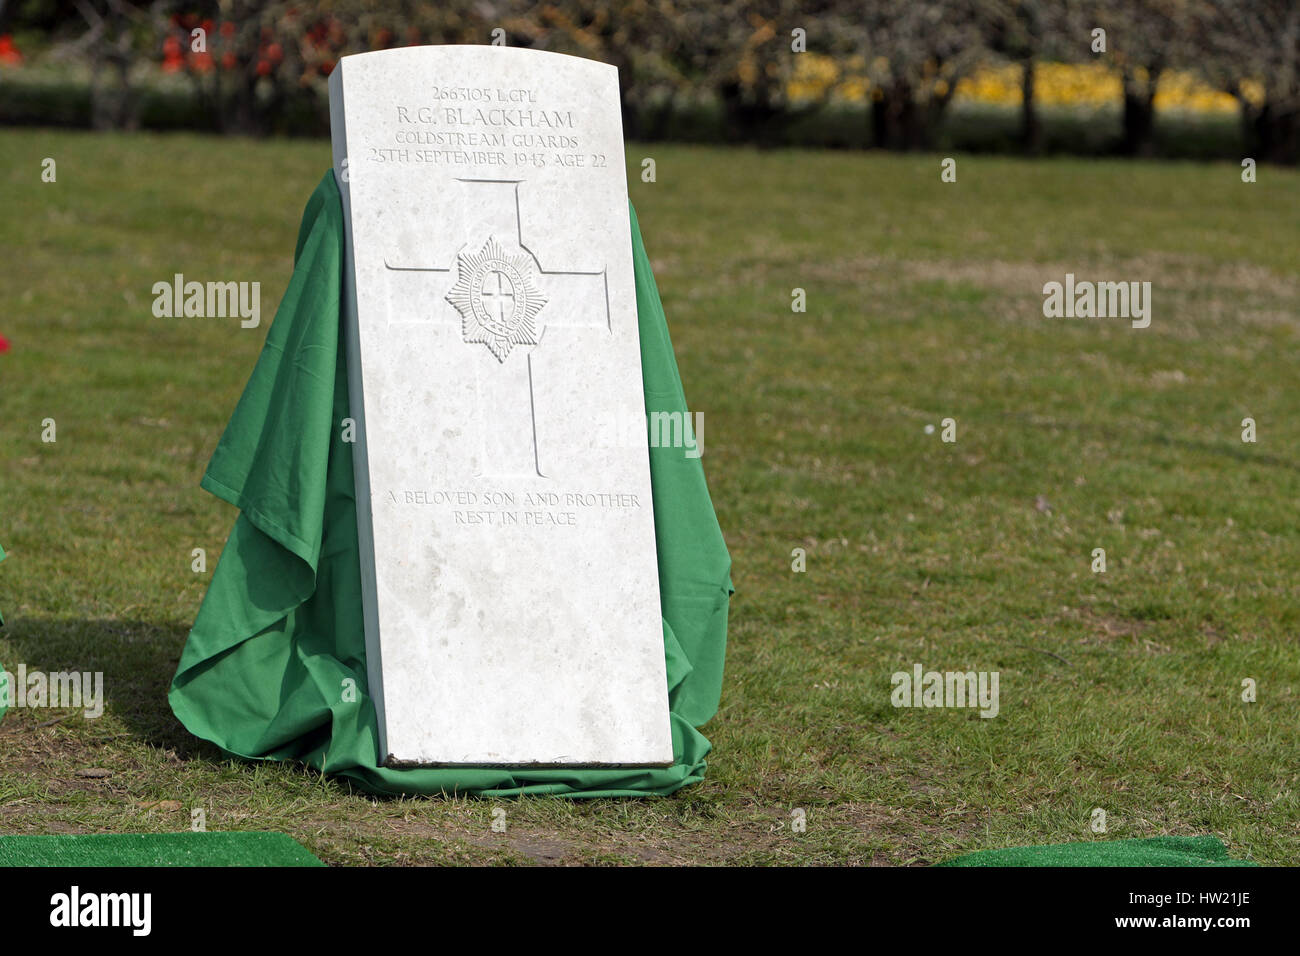 The Tombstone of Lance Corporal Ronald George Blackham from Northwich, Cheshire at the Commonwealth War Graves Commission (CWGC) Salerno War Cemetery, in Italy, who were all killed in WWII, during a fierce battle on 25 September 1943 on Hill 270, near the village of Capezzano. Stock Photo